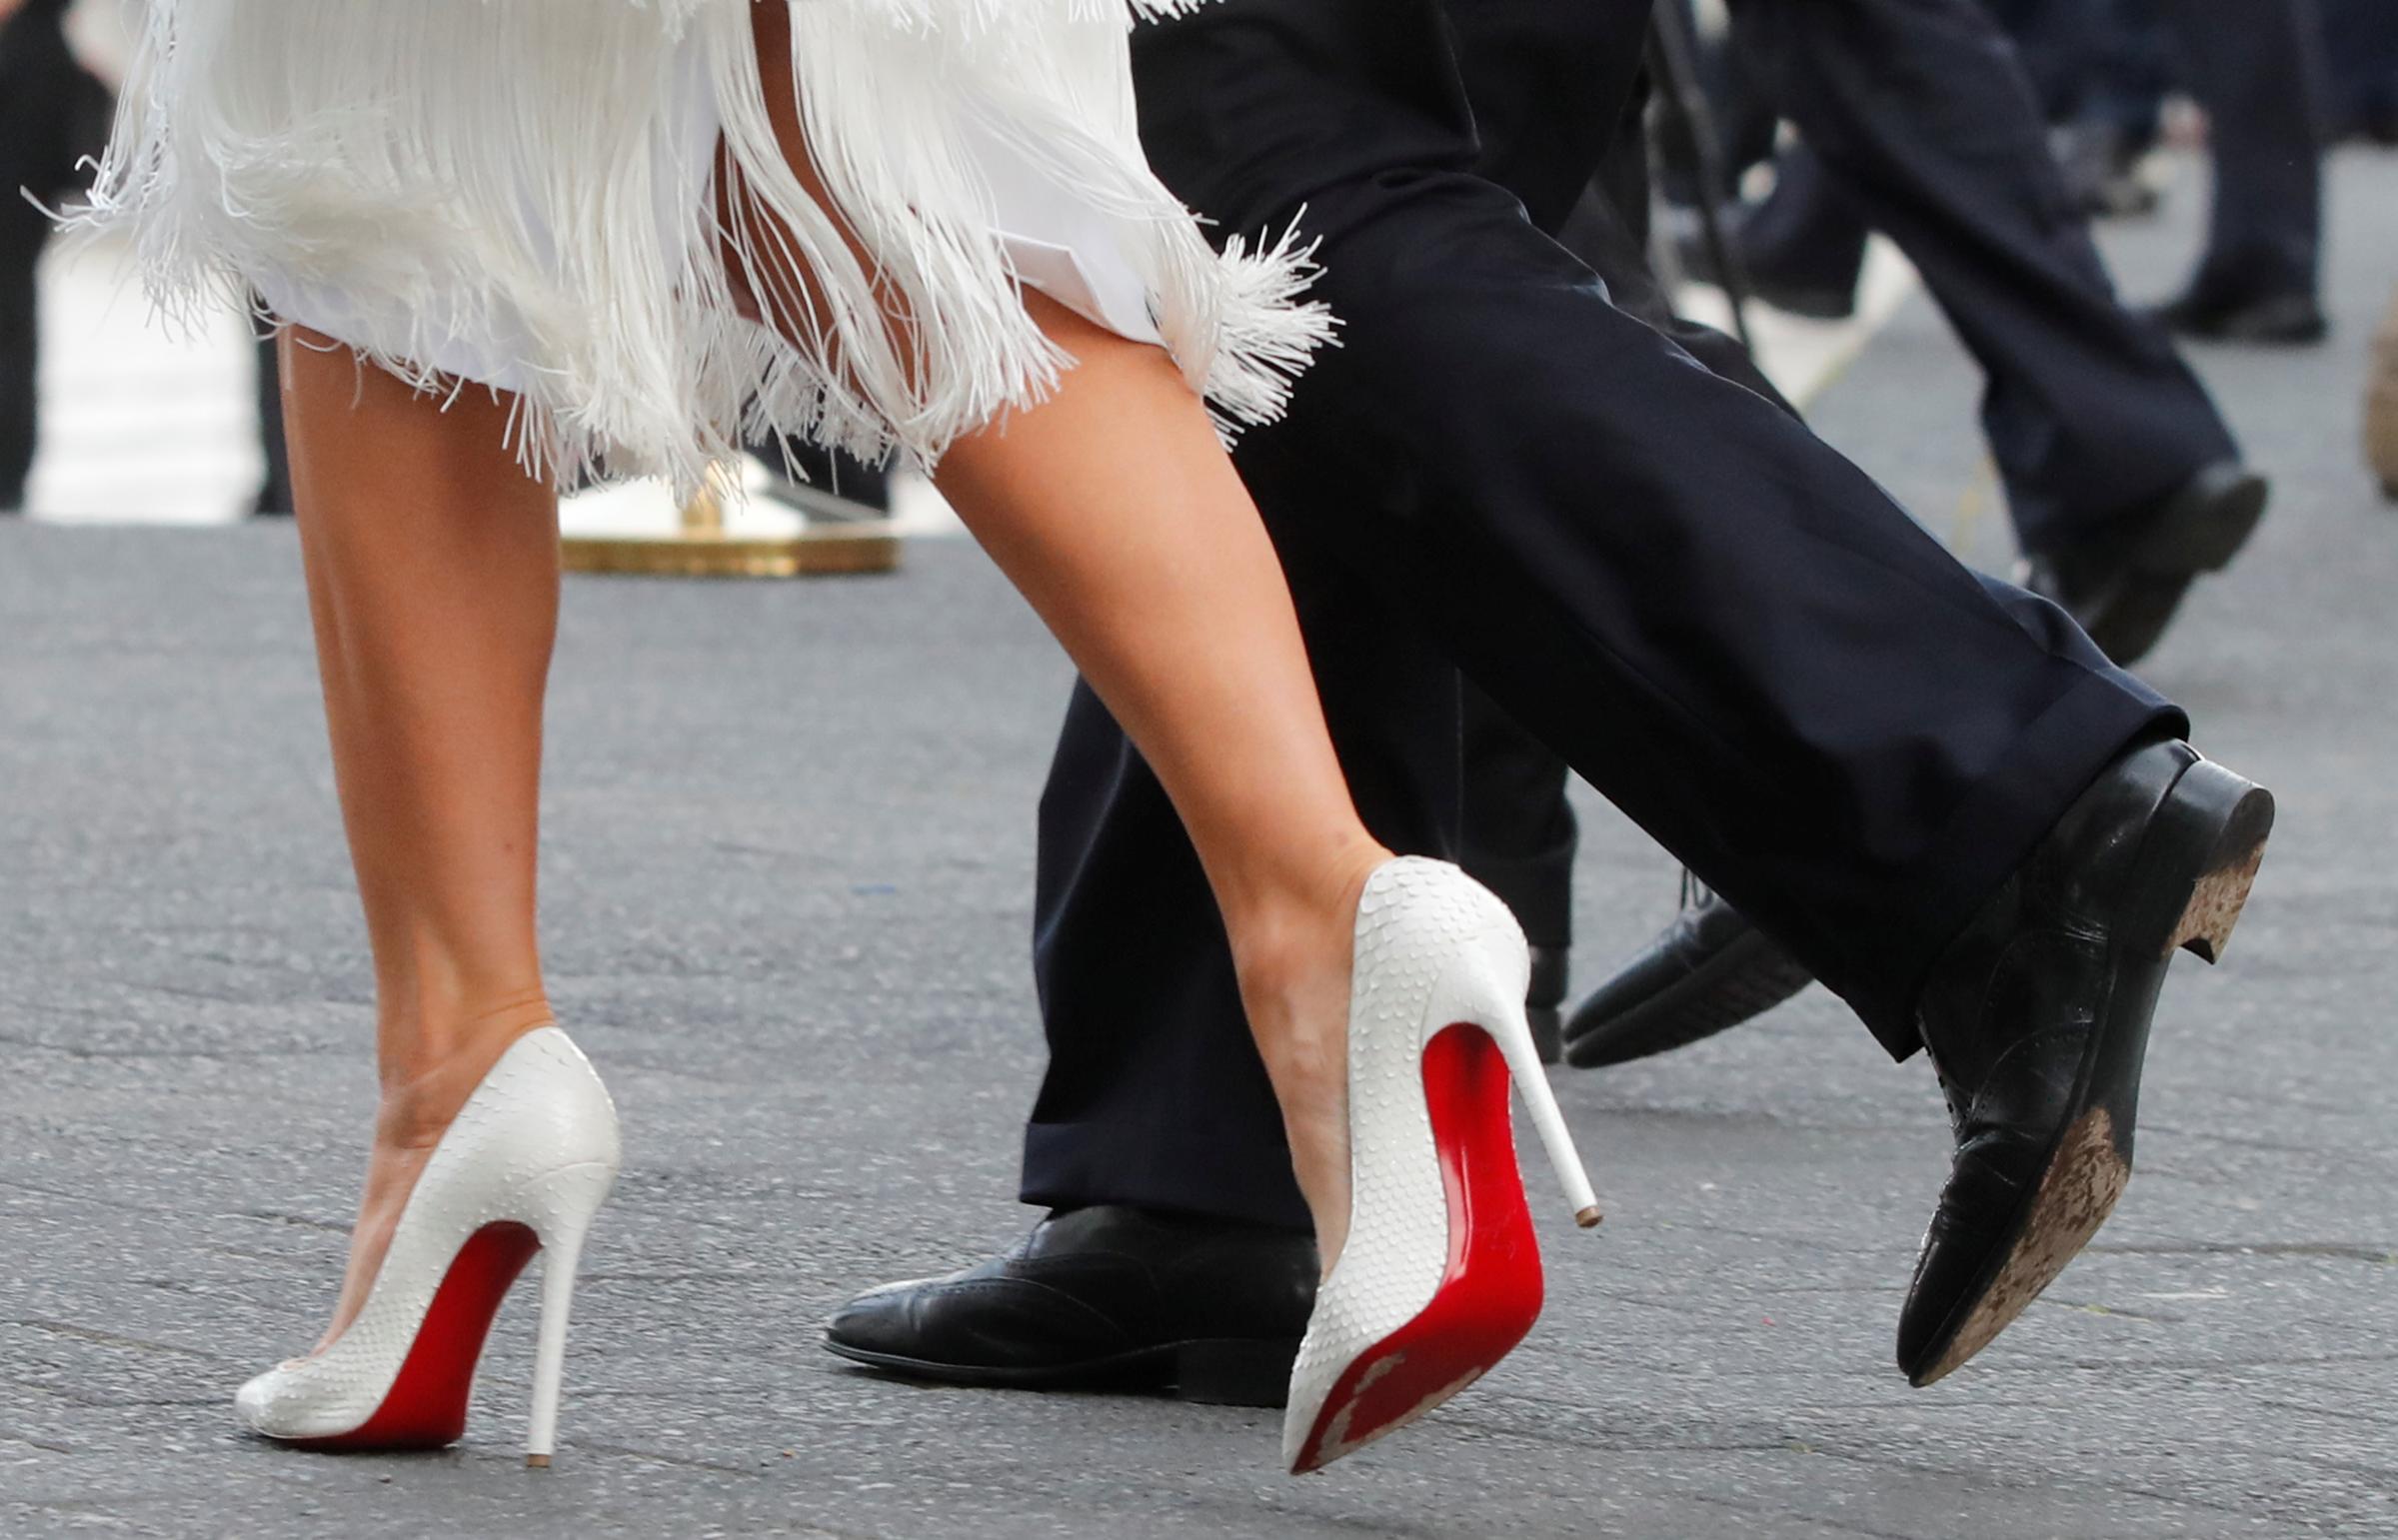 President Donald Trump and his wife Melania Trump wearing Christian Louboutin white stilettos , are seen at the G20 summit in Hamburg, Germany July 7, 2017.